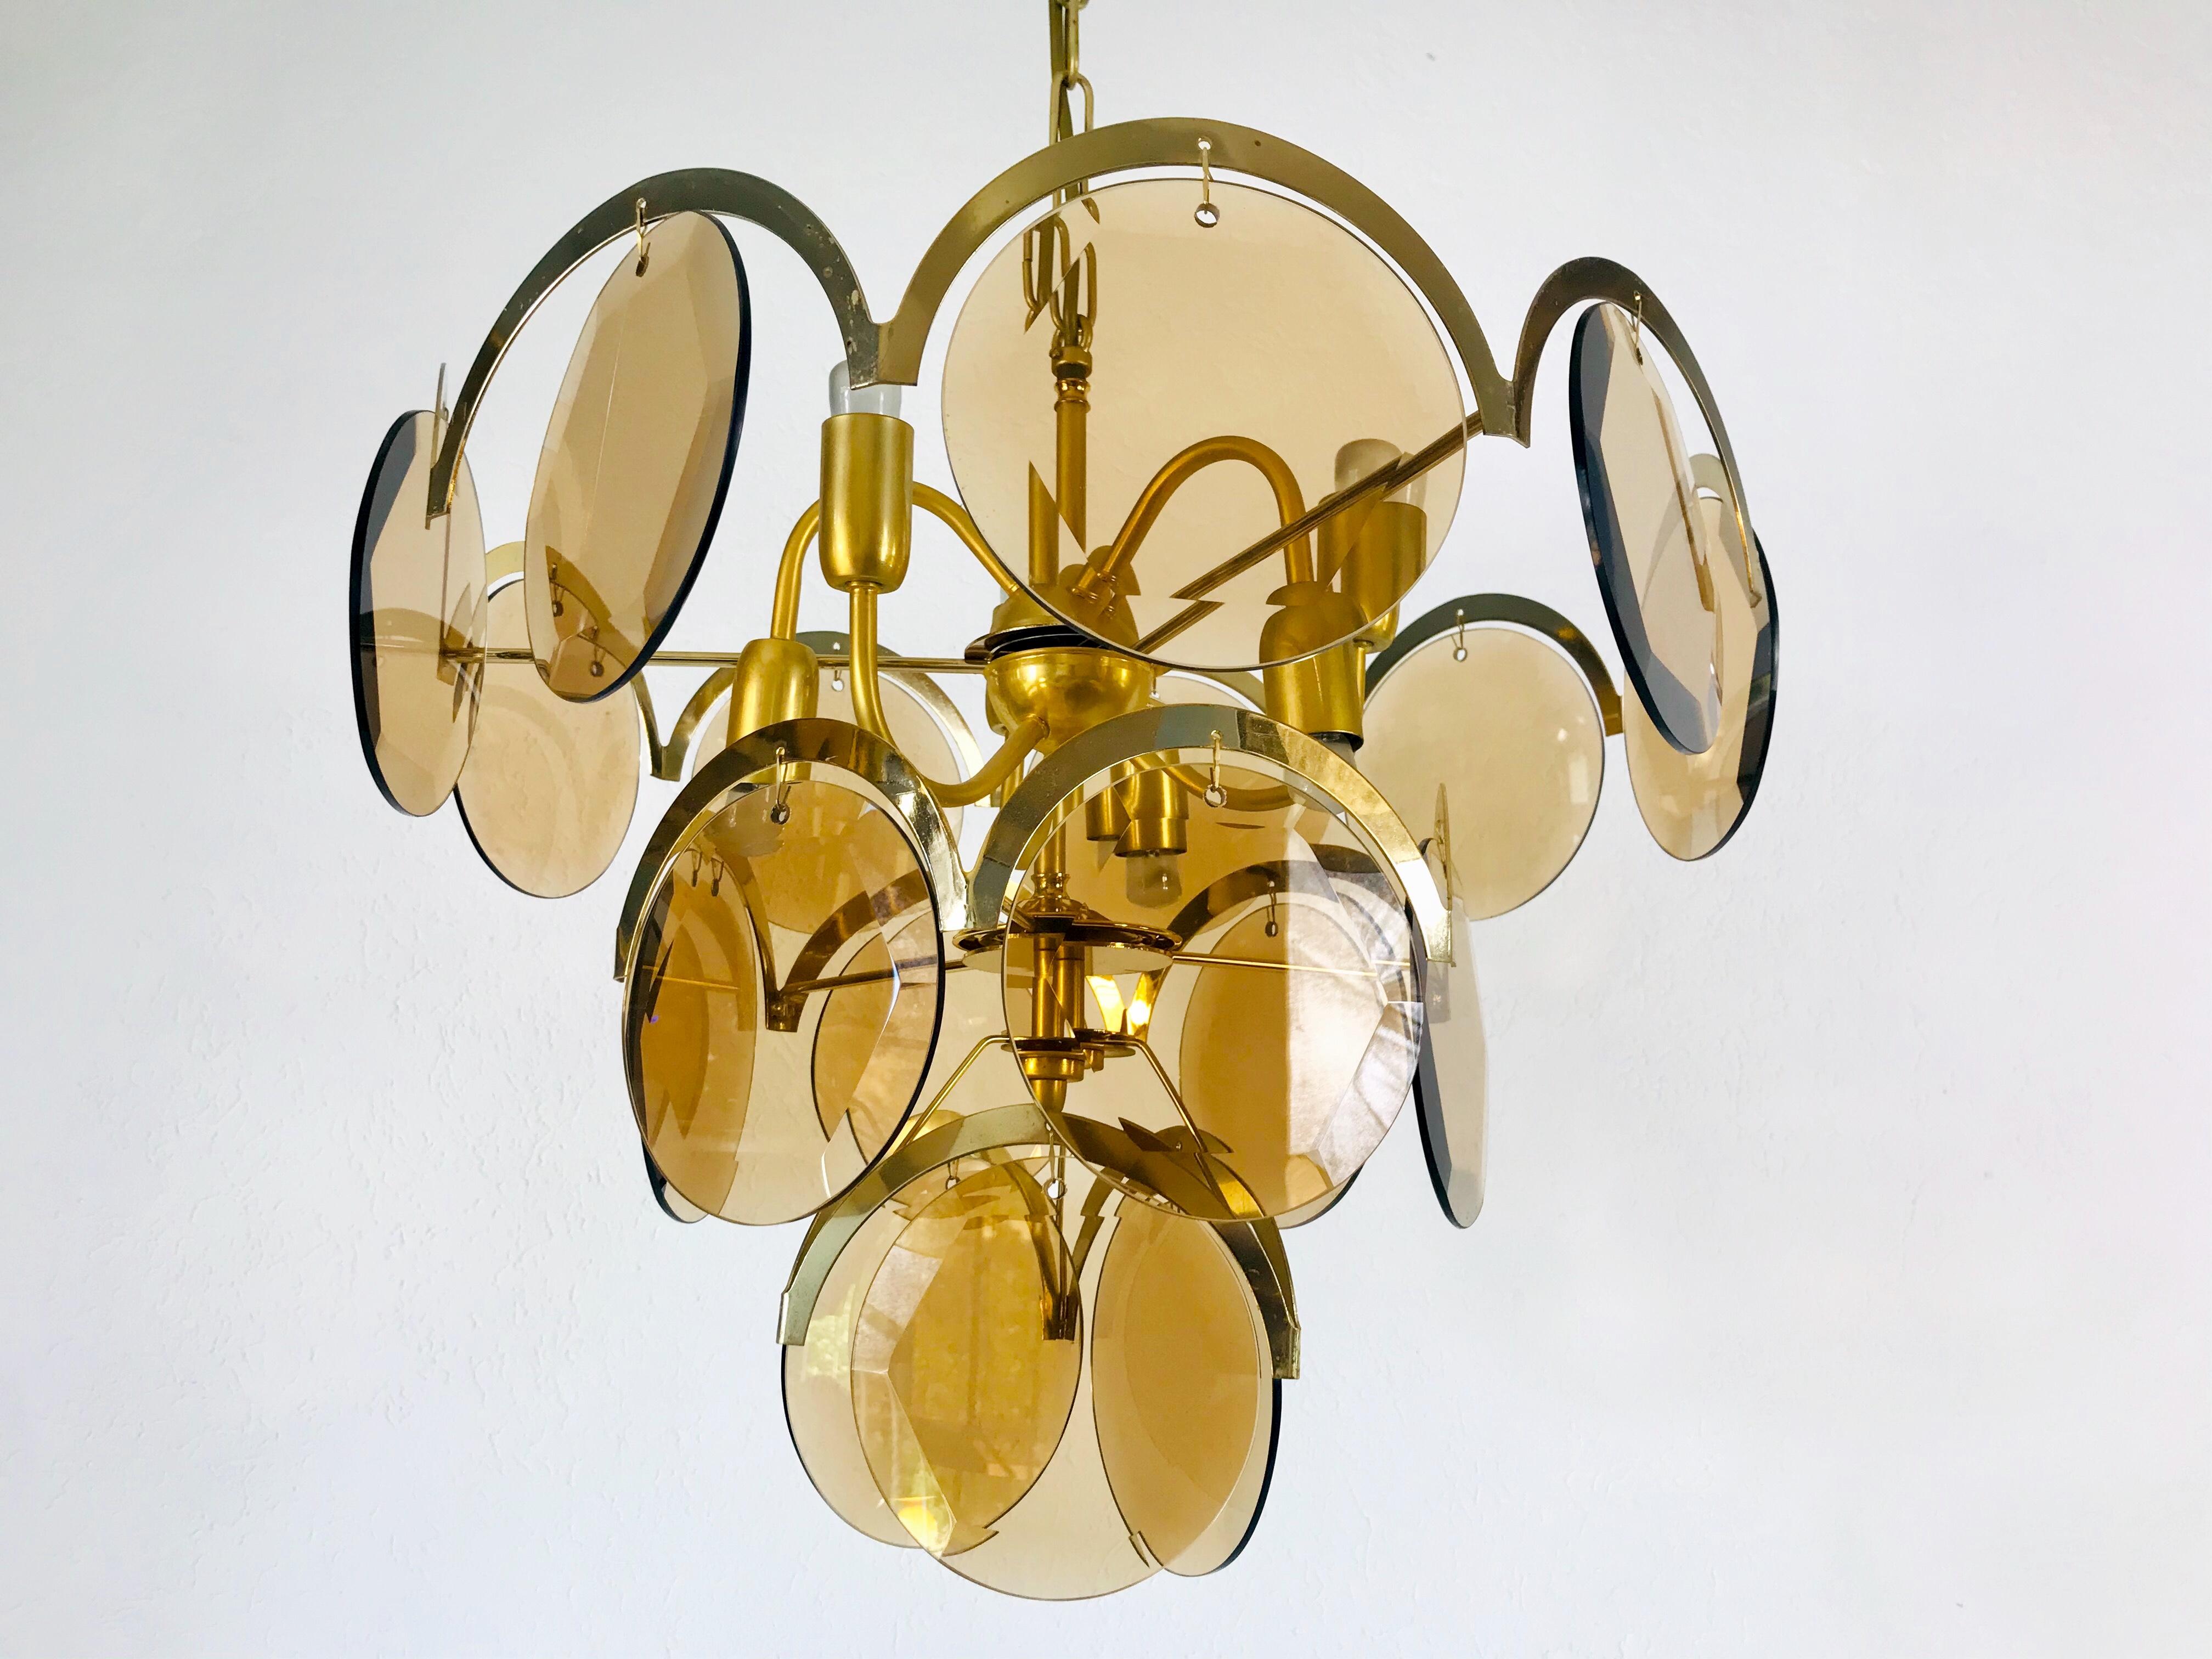 Metal Midcentury Three-Tier Brass and Glass Chandelier by Vistosi, 1960s For Sale